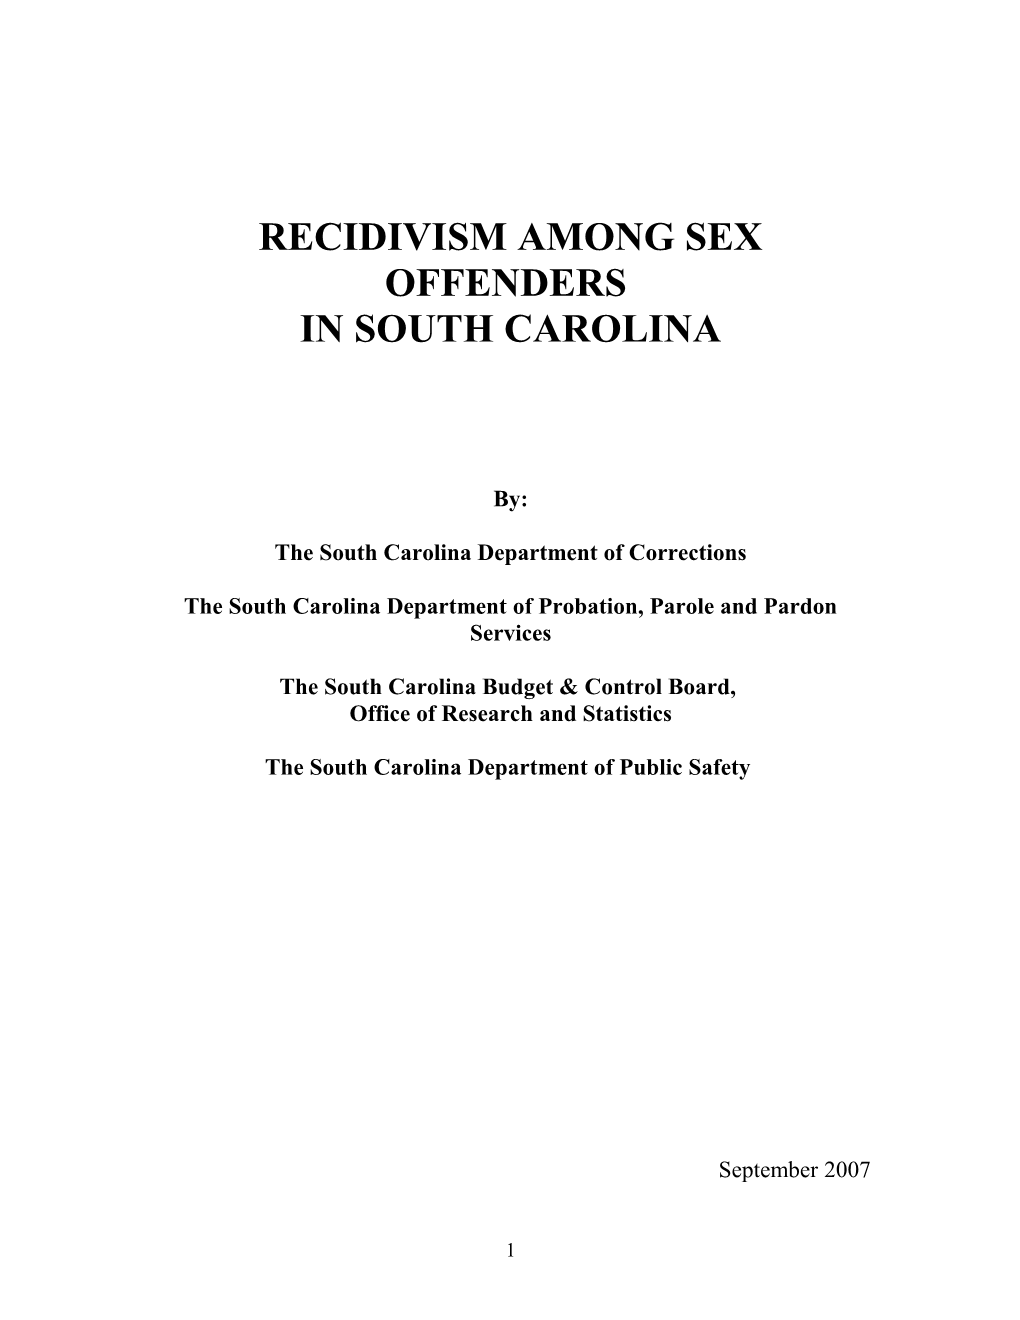 Recidivism Among Sex Offenders in South Carolina